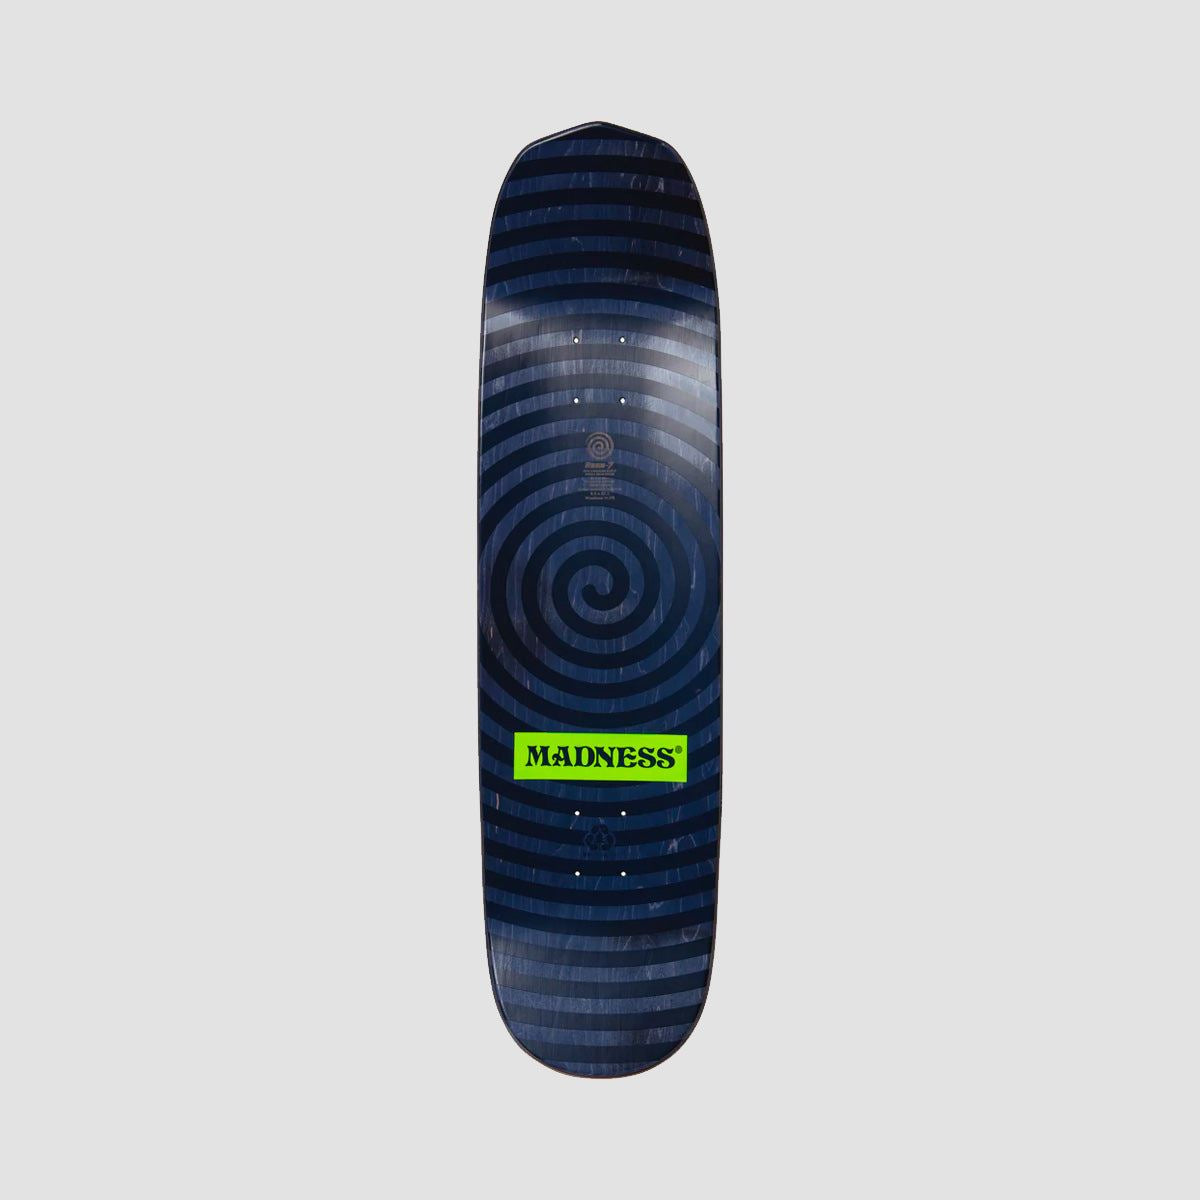 Madness Outcast R7 Slick On Middle Section Burden Shaped Skateboard Deck Green/Multi - 8.5"